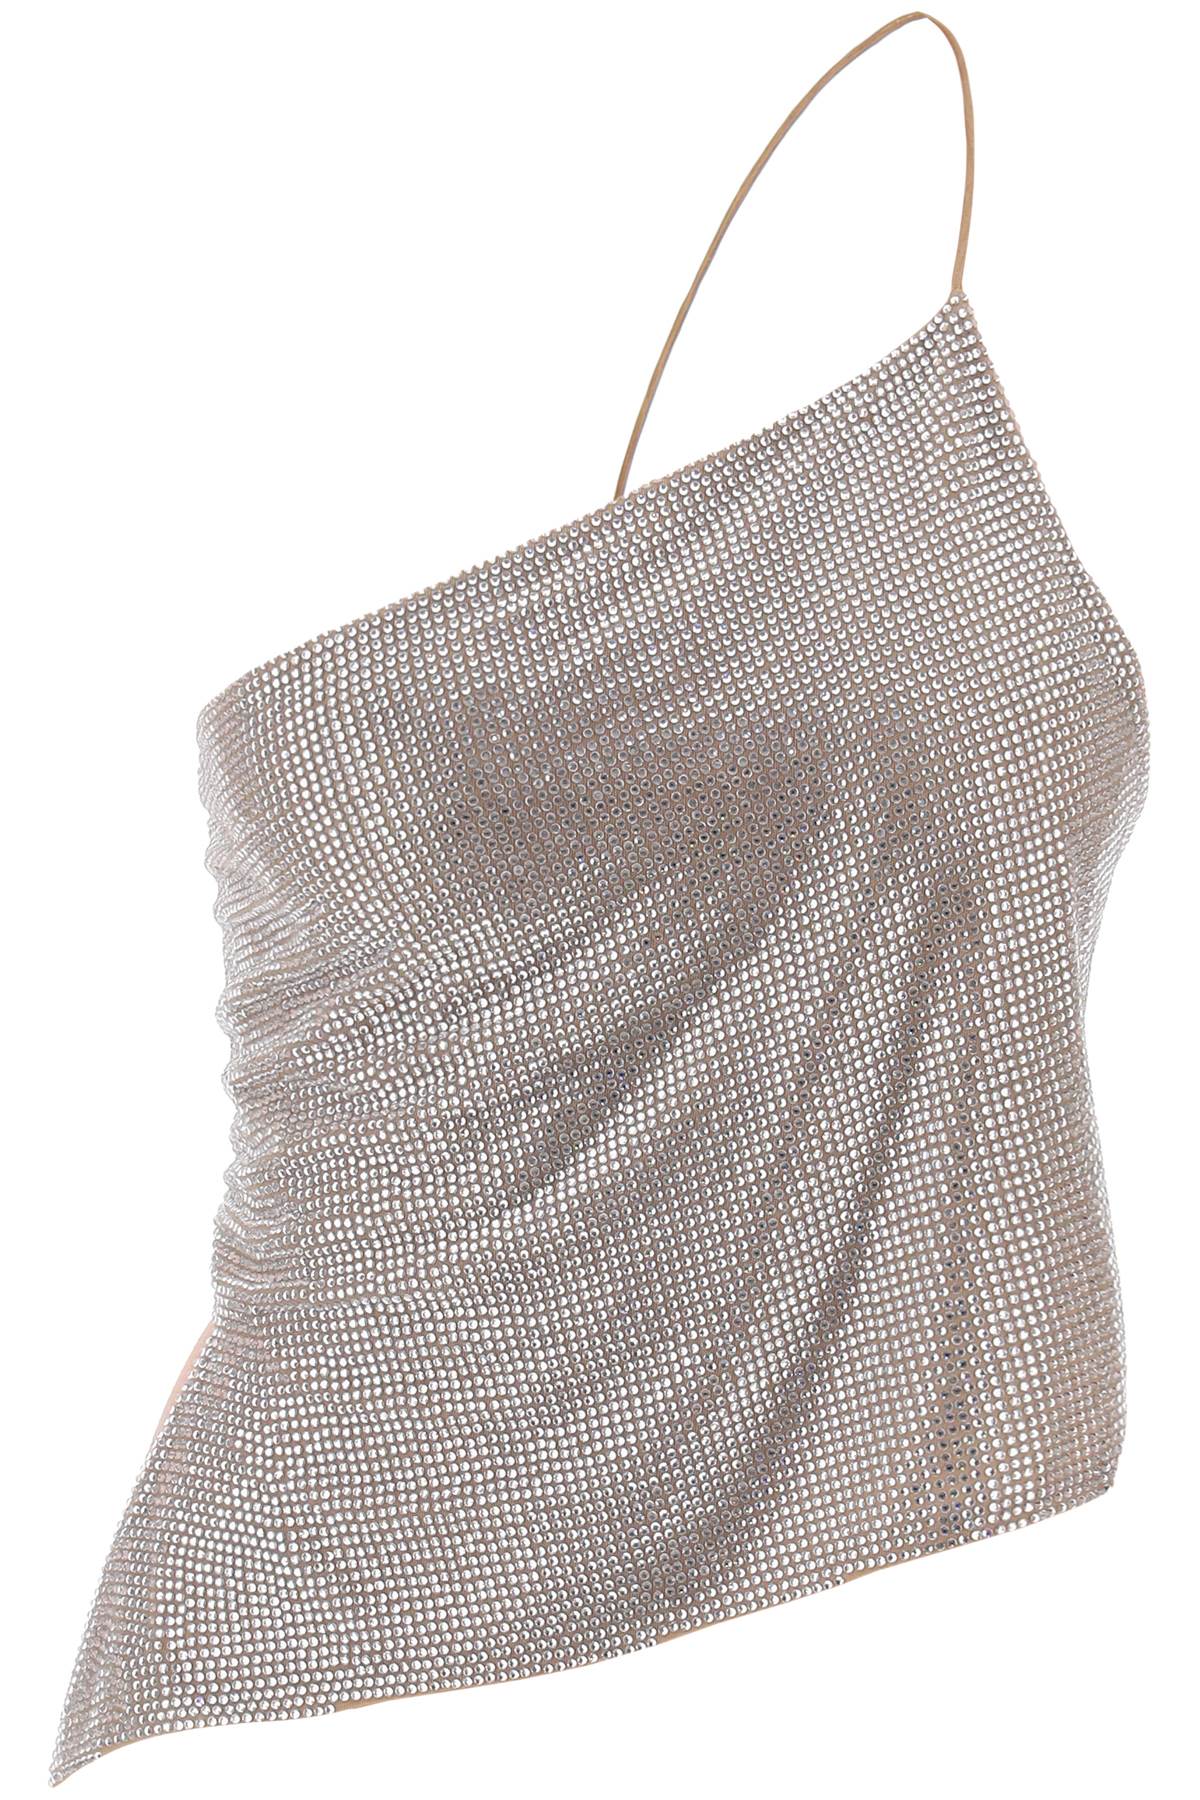 Giuseppe di morabito cropped top in mesh with crystals all-over 186TOC212 SILVER